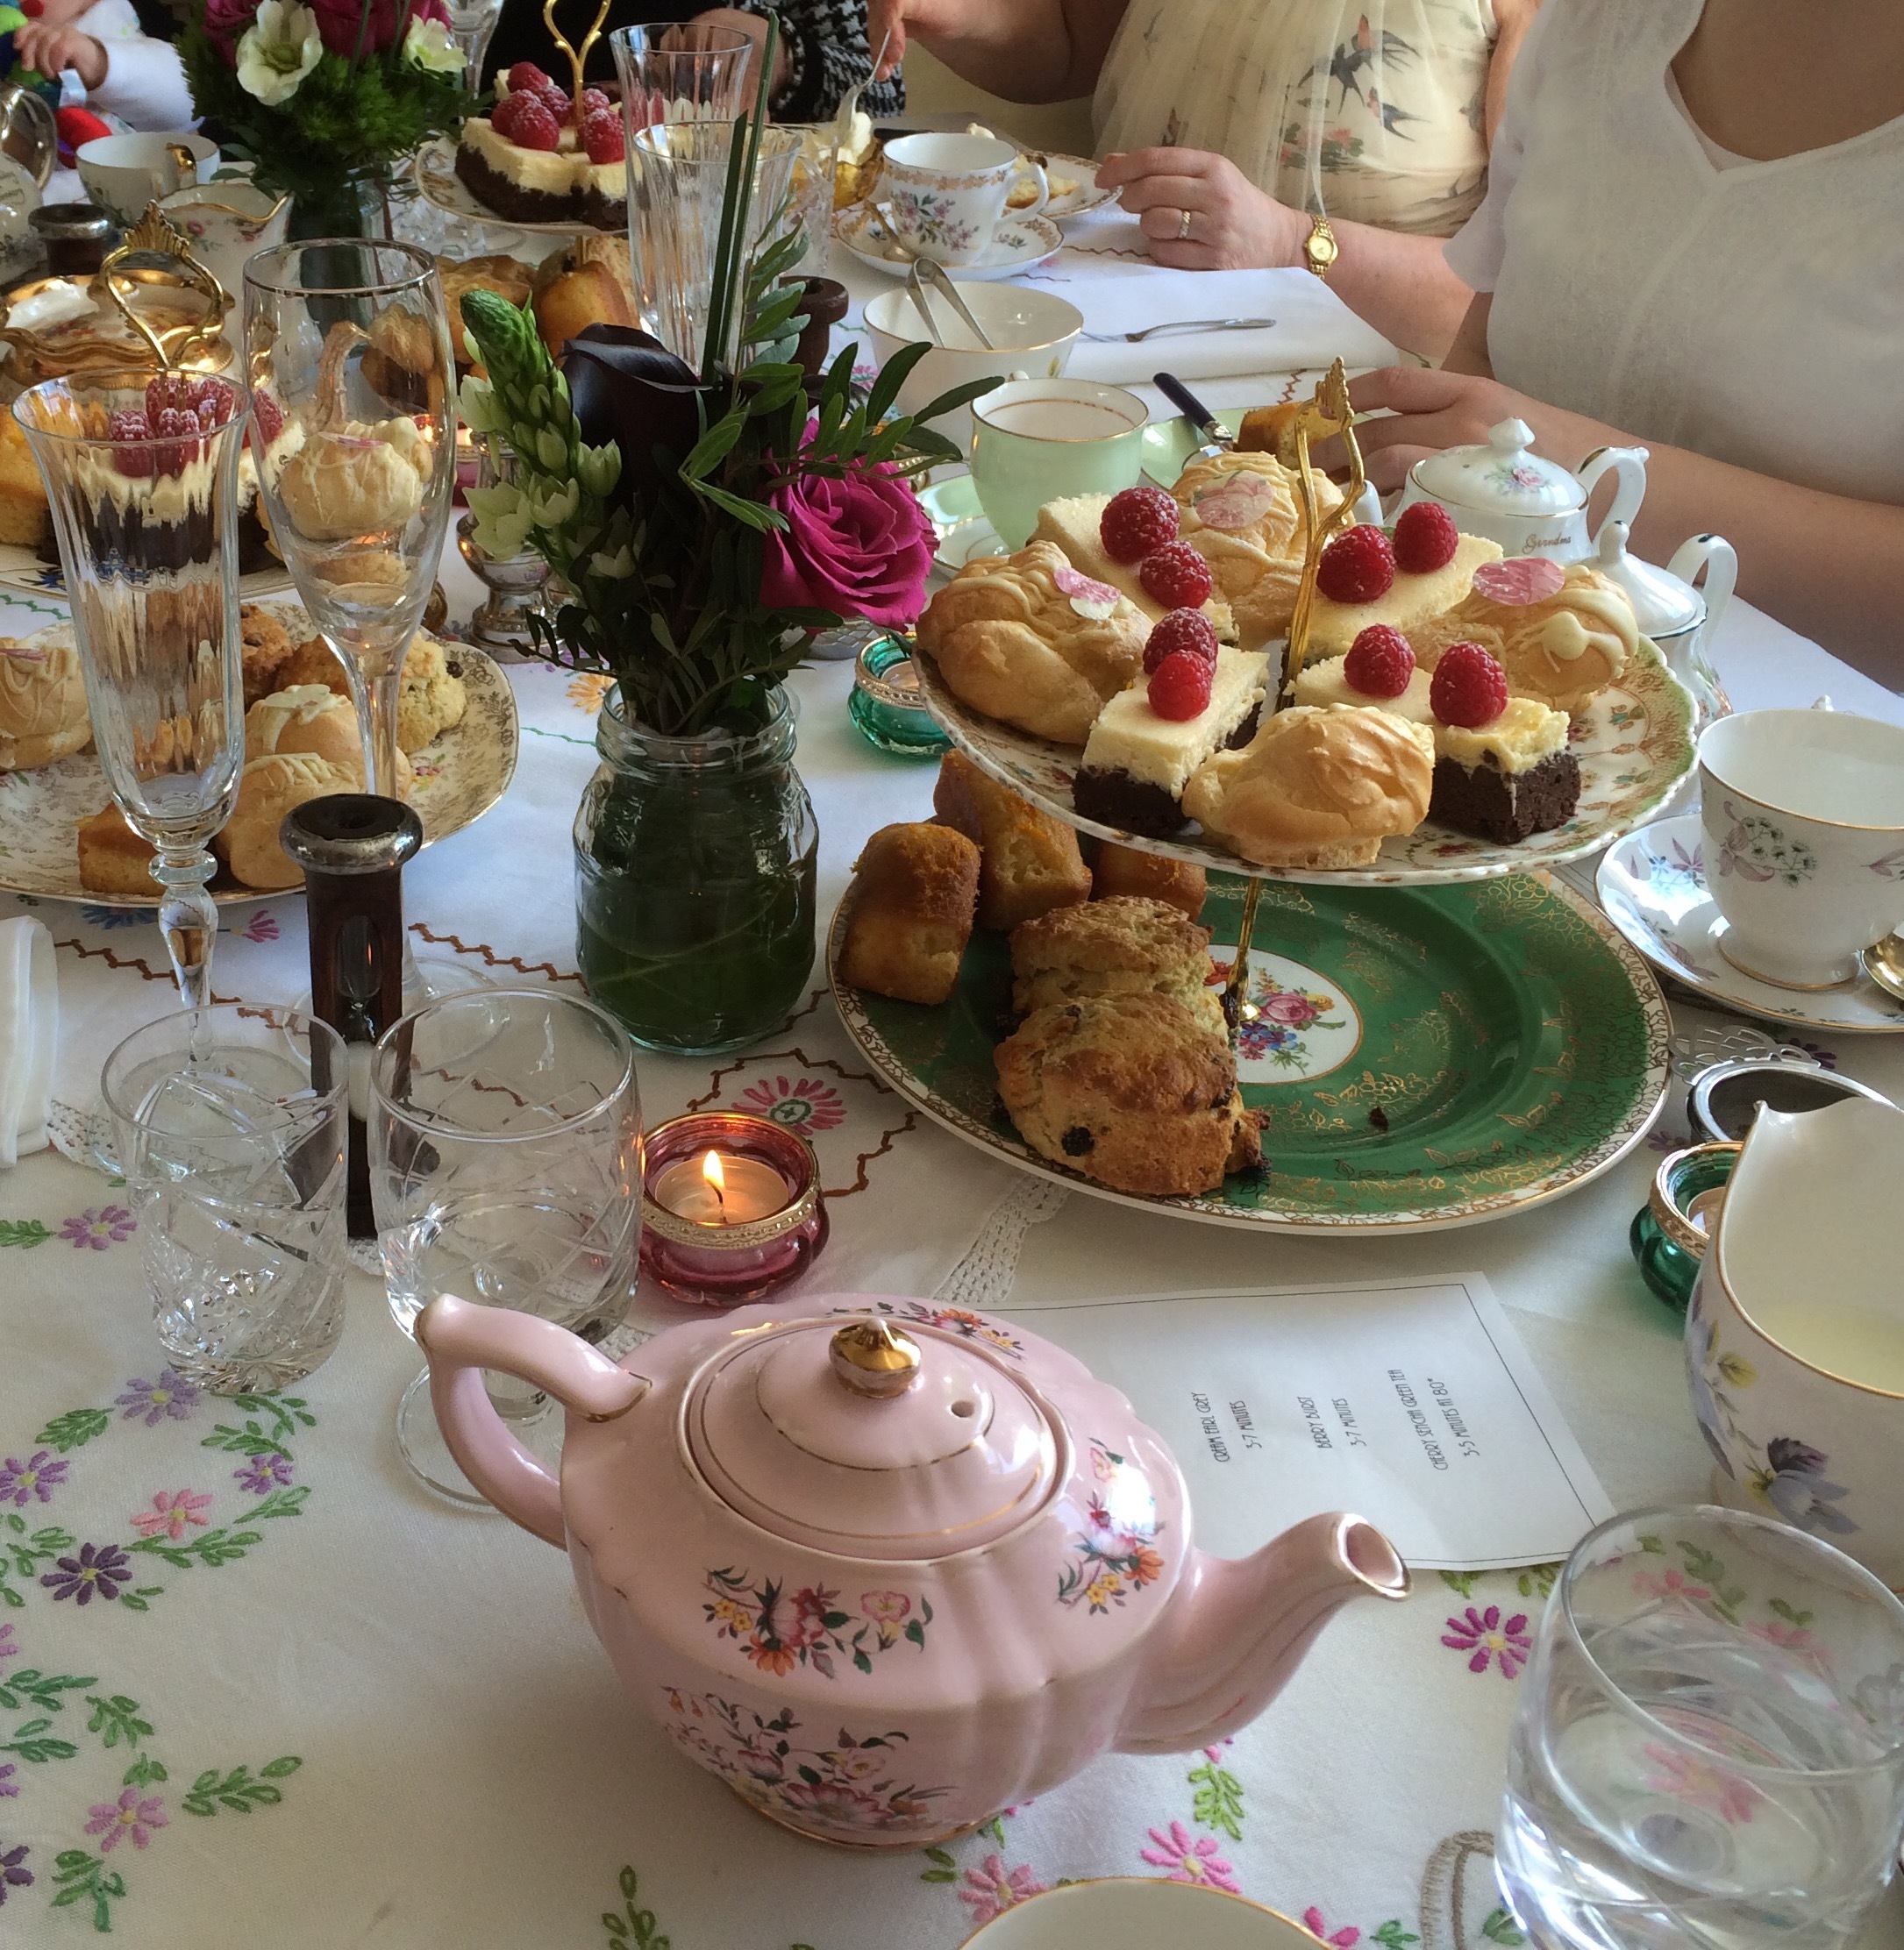 Room Forty traditional afternoon teas are served on vintage china with vintage tablecloths